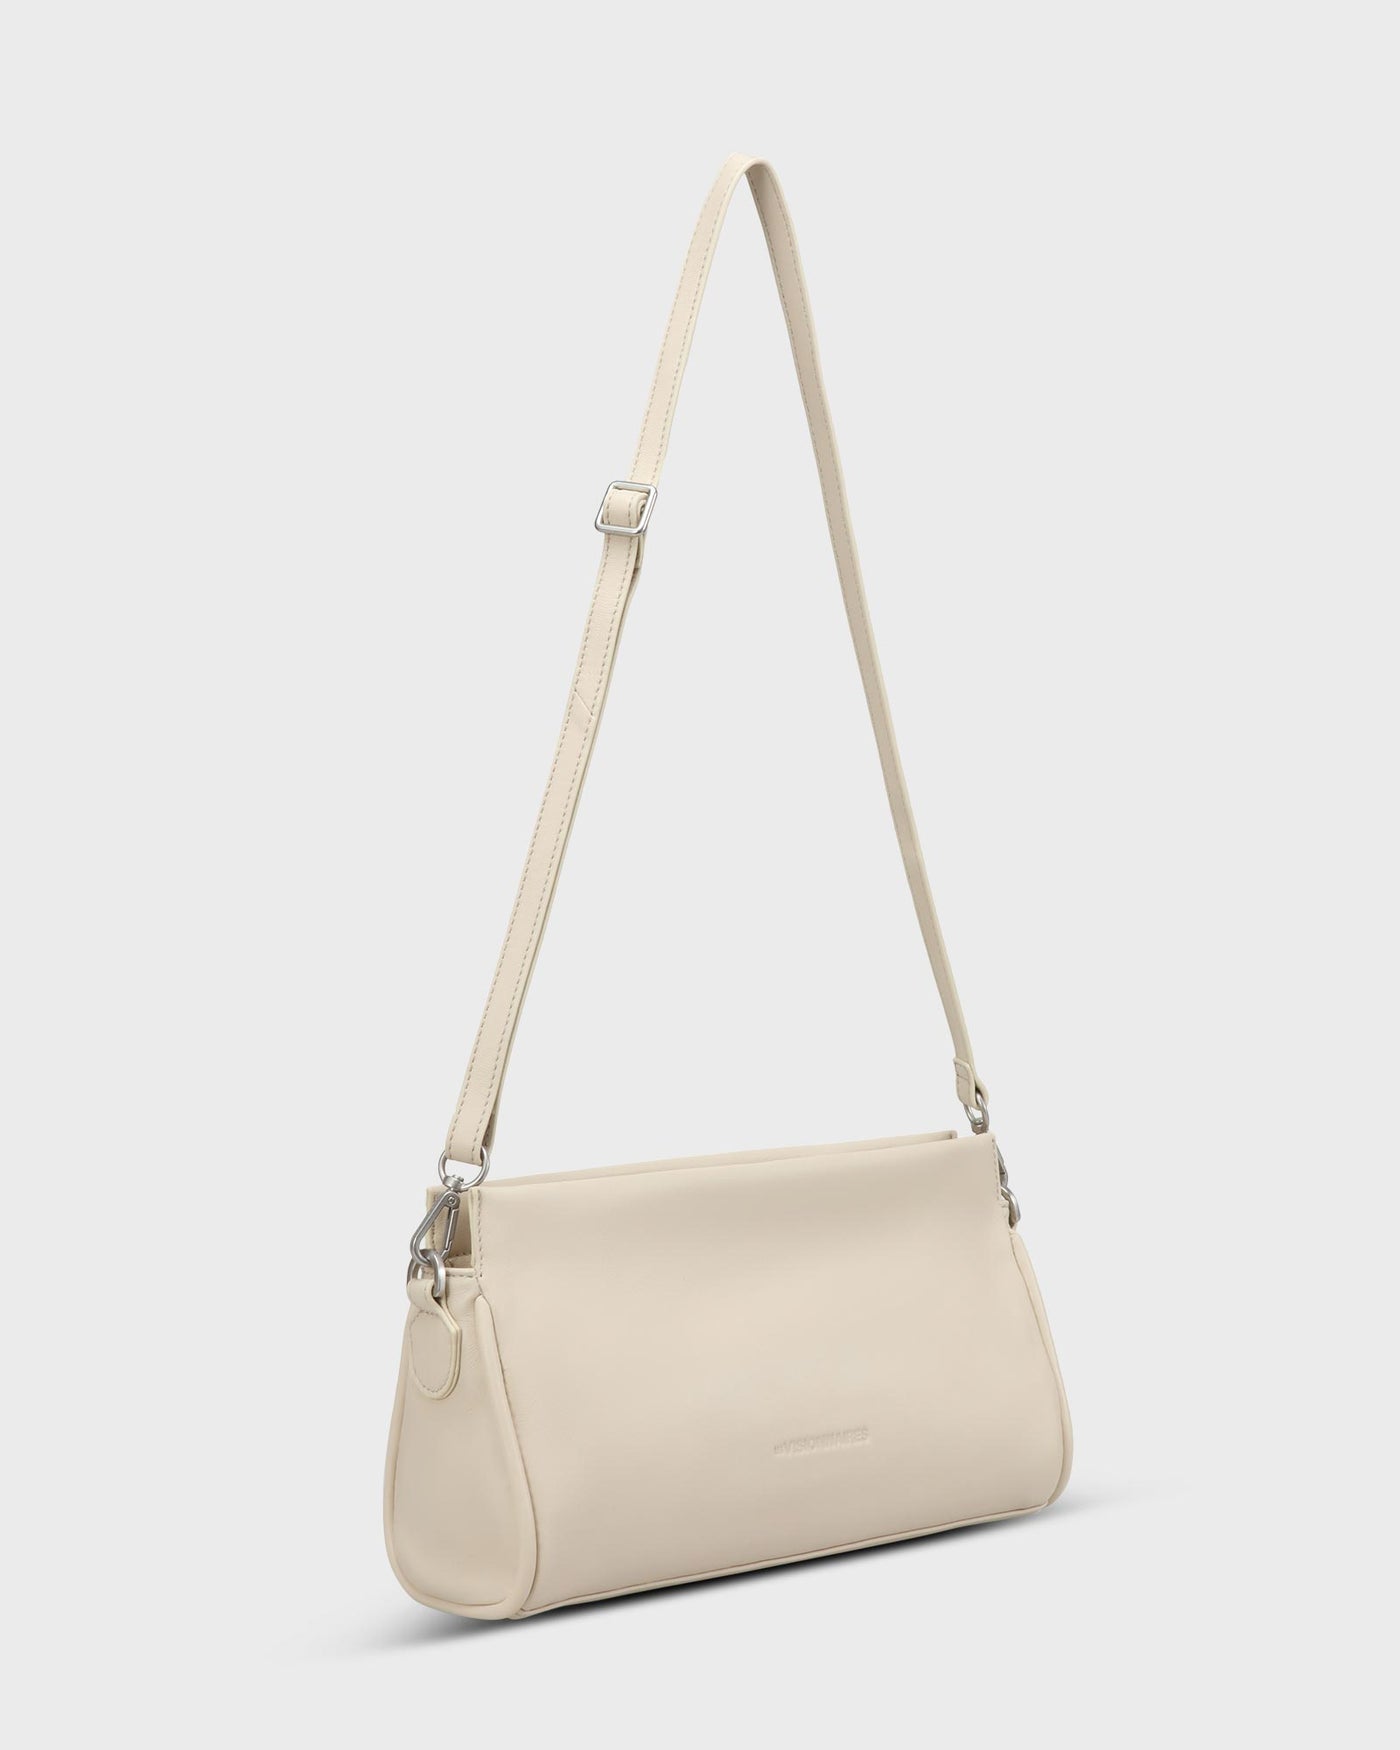 Les Visionnaires Tasche Gabrielle Piping Off White myMEID